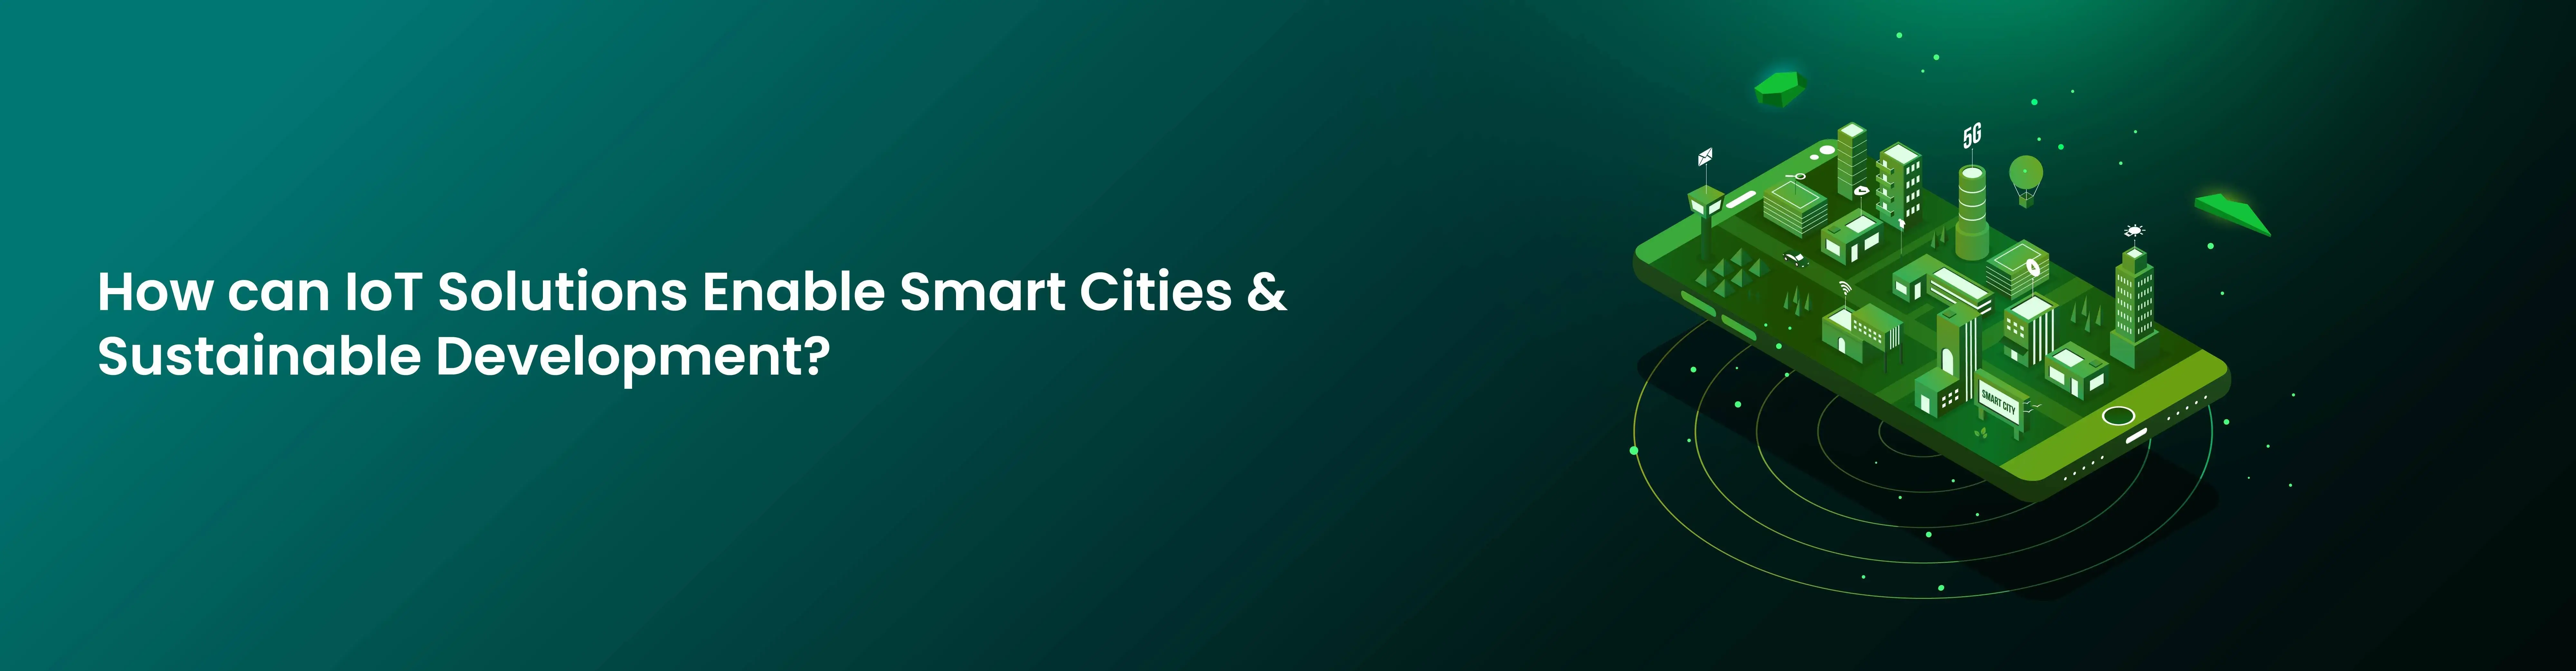 1712299038How can IoT Solutions Enable Smart Cities and Sustainable Development.webp